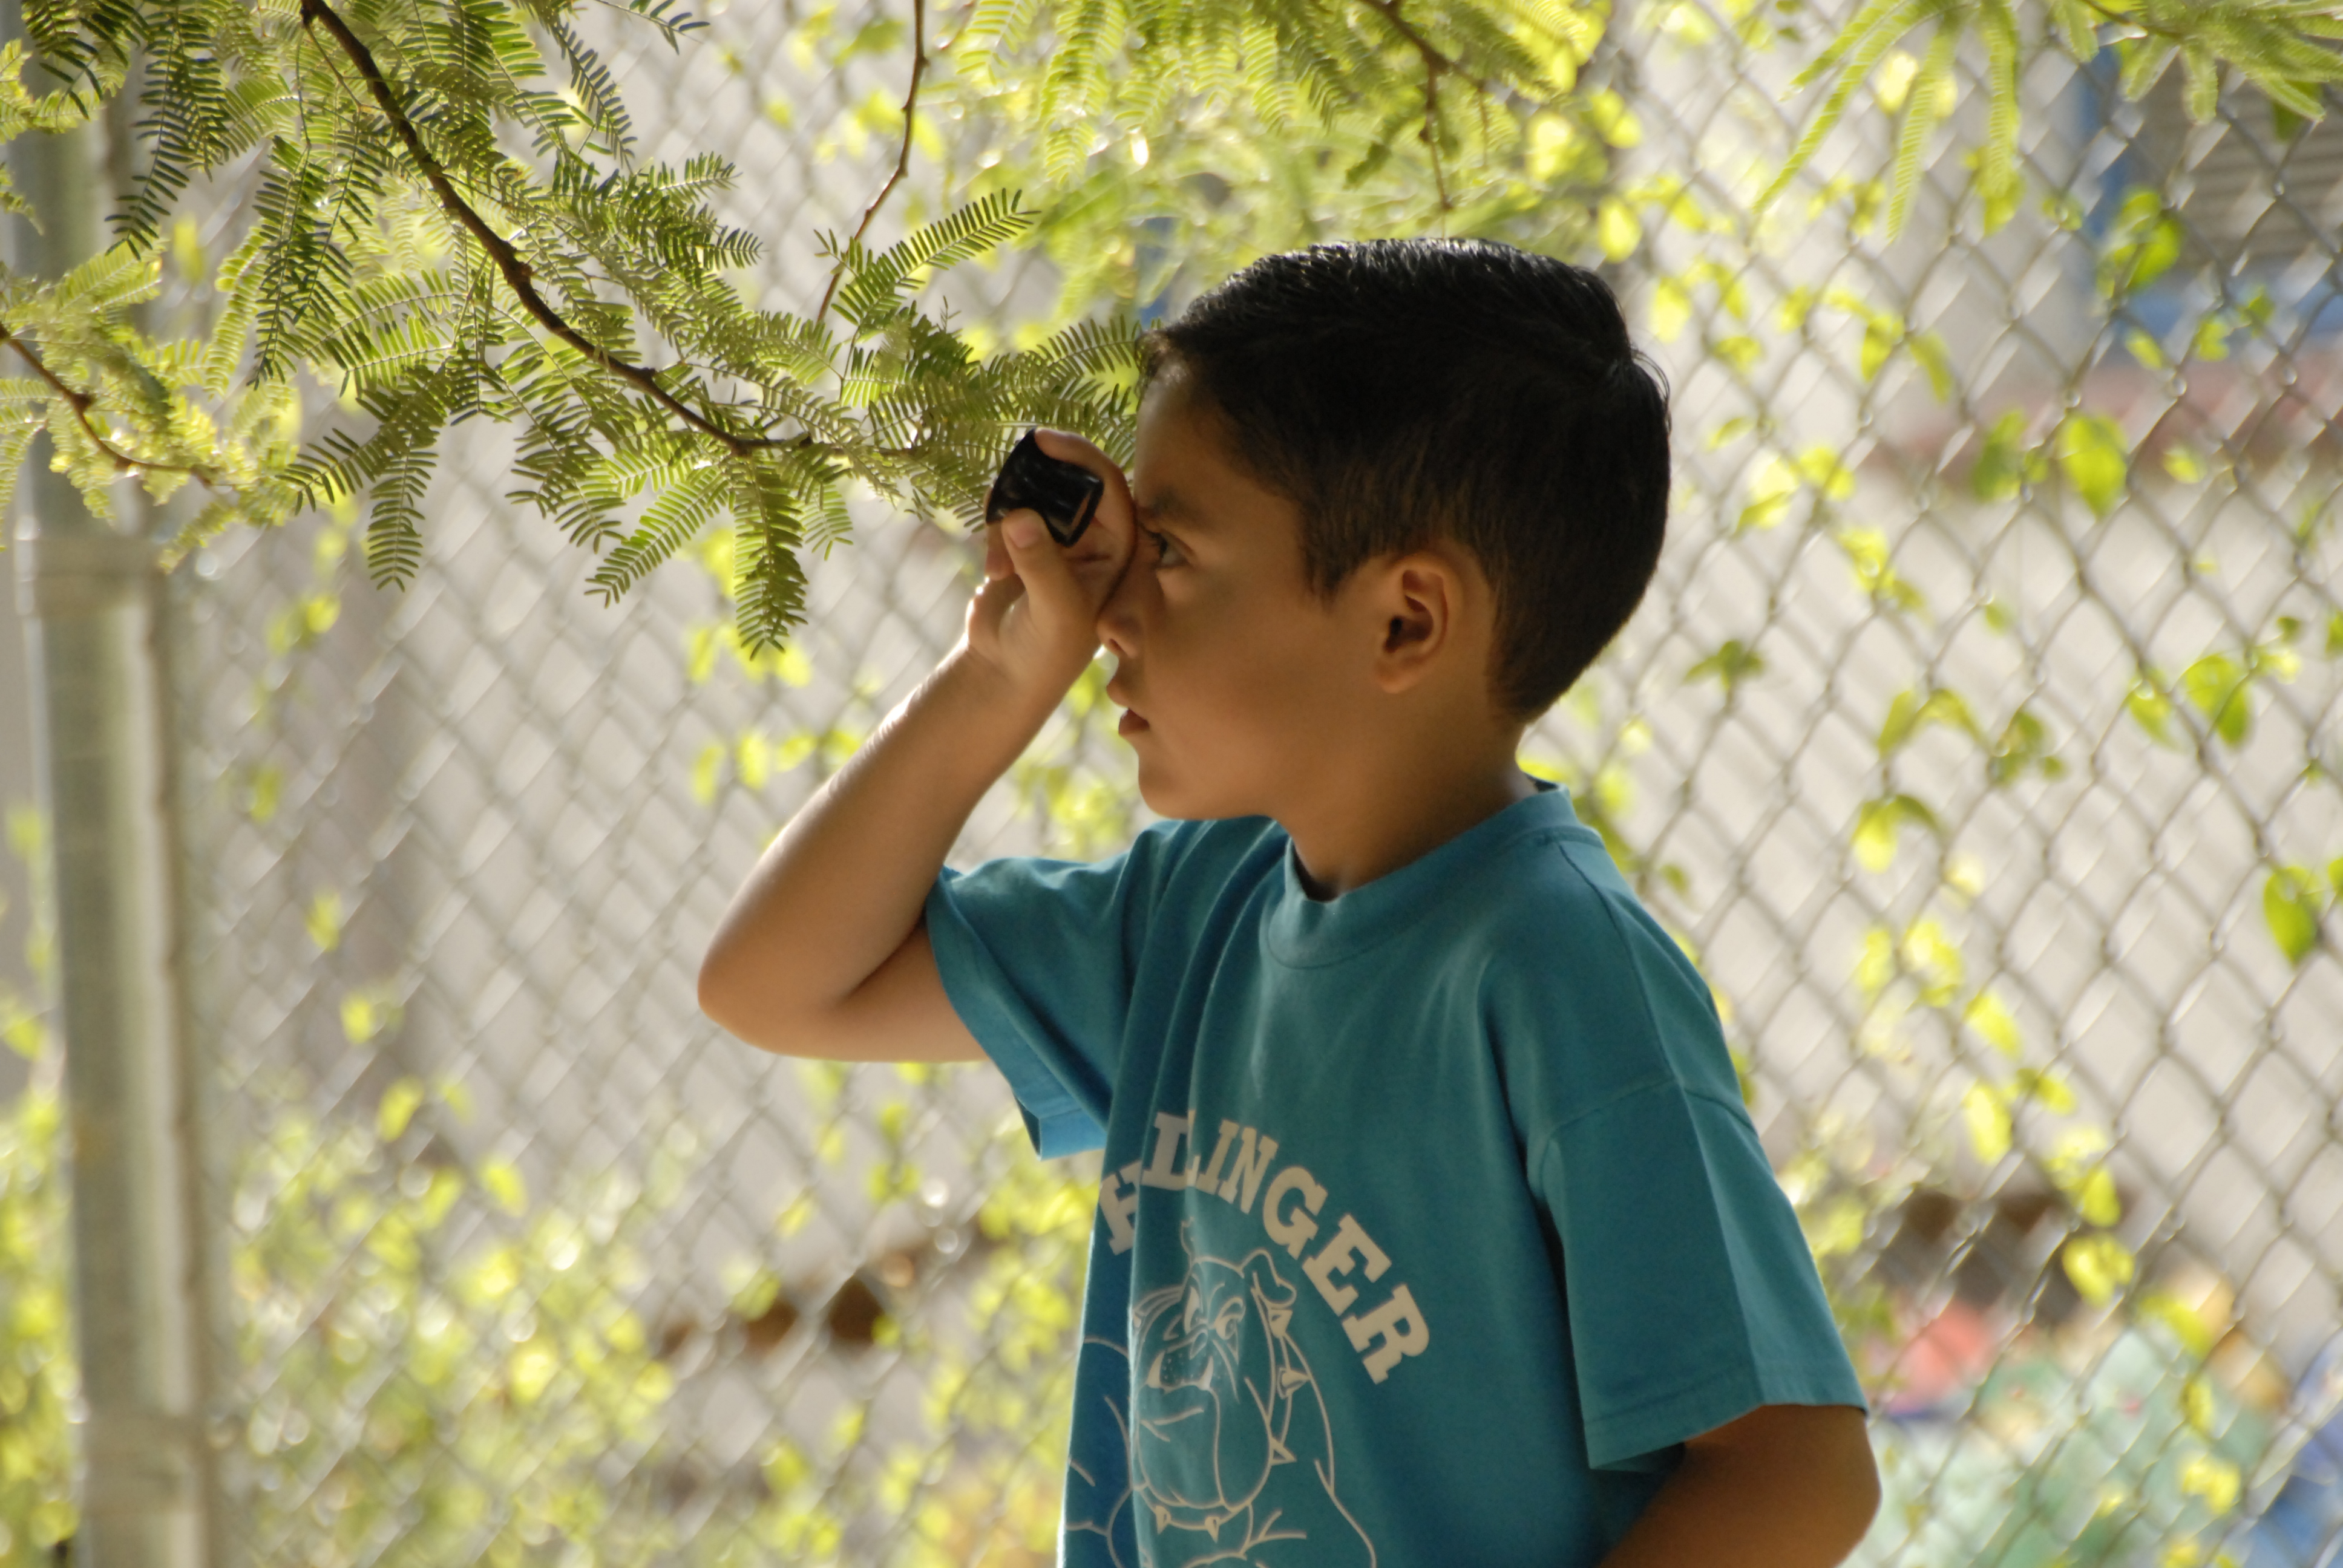 A boy uses a magnifying glass to look at leaves on a tree